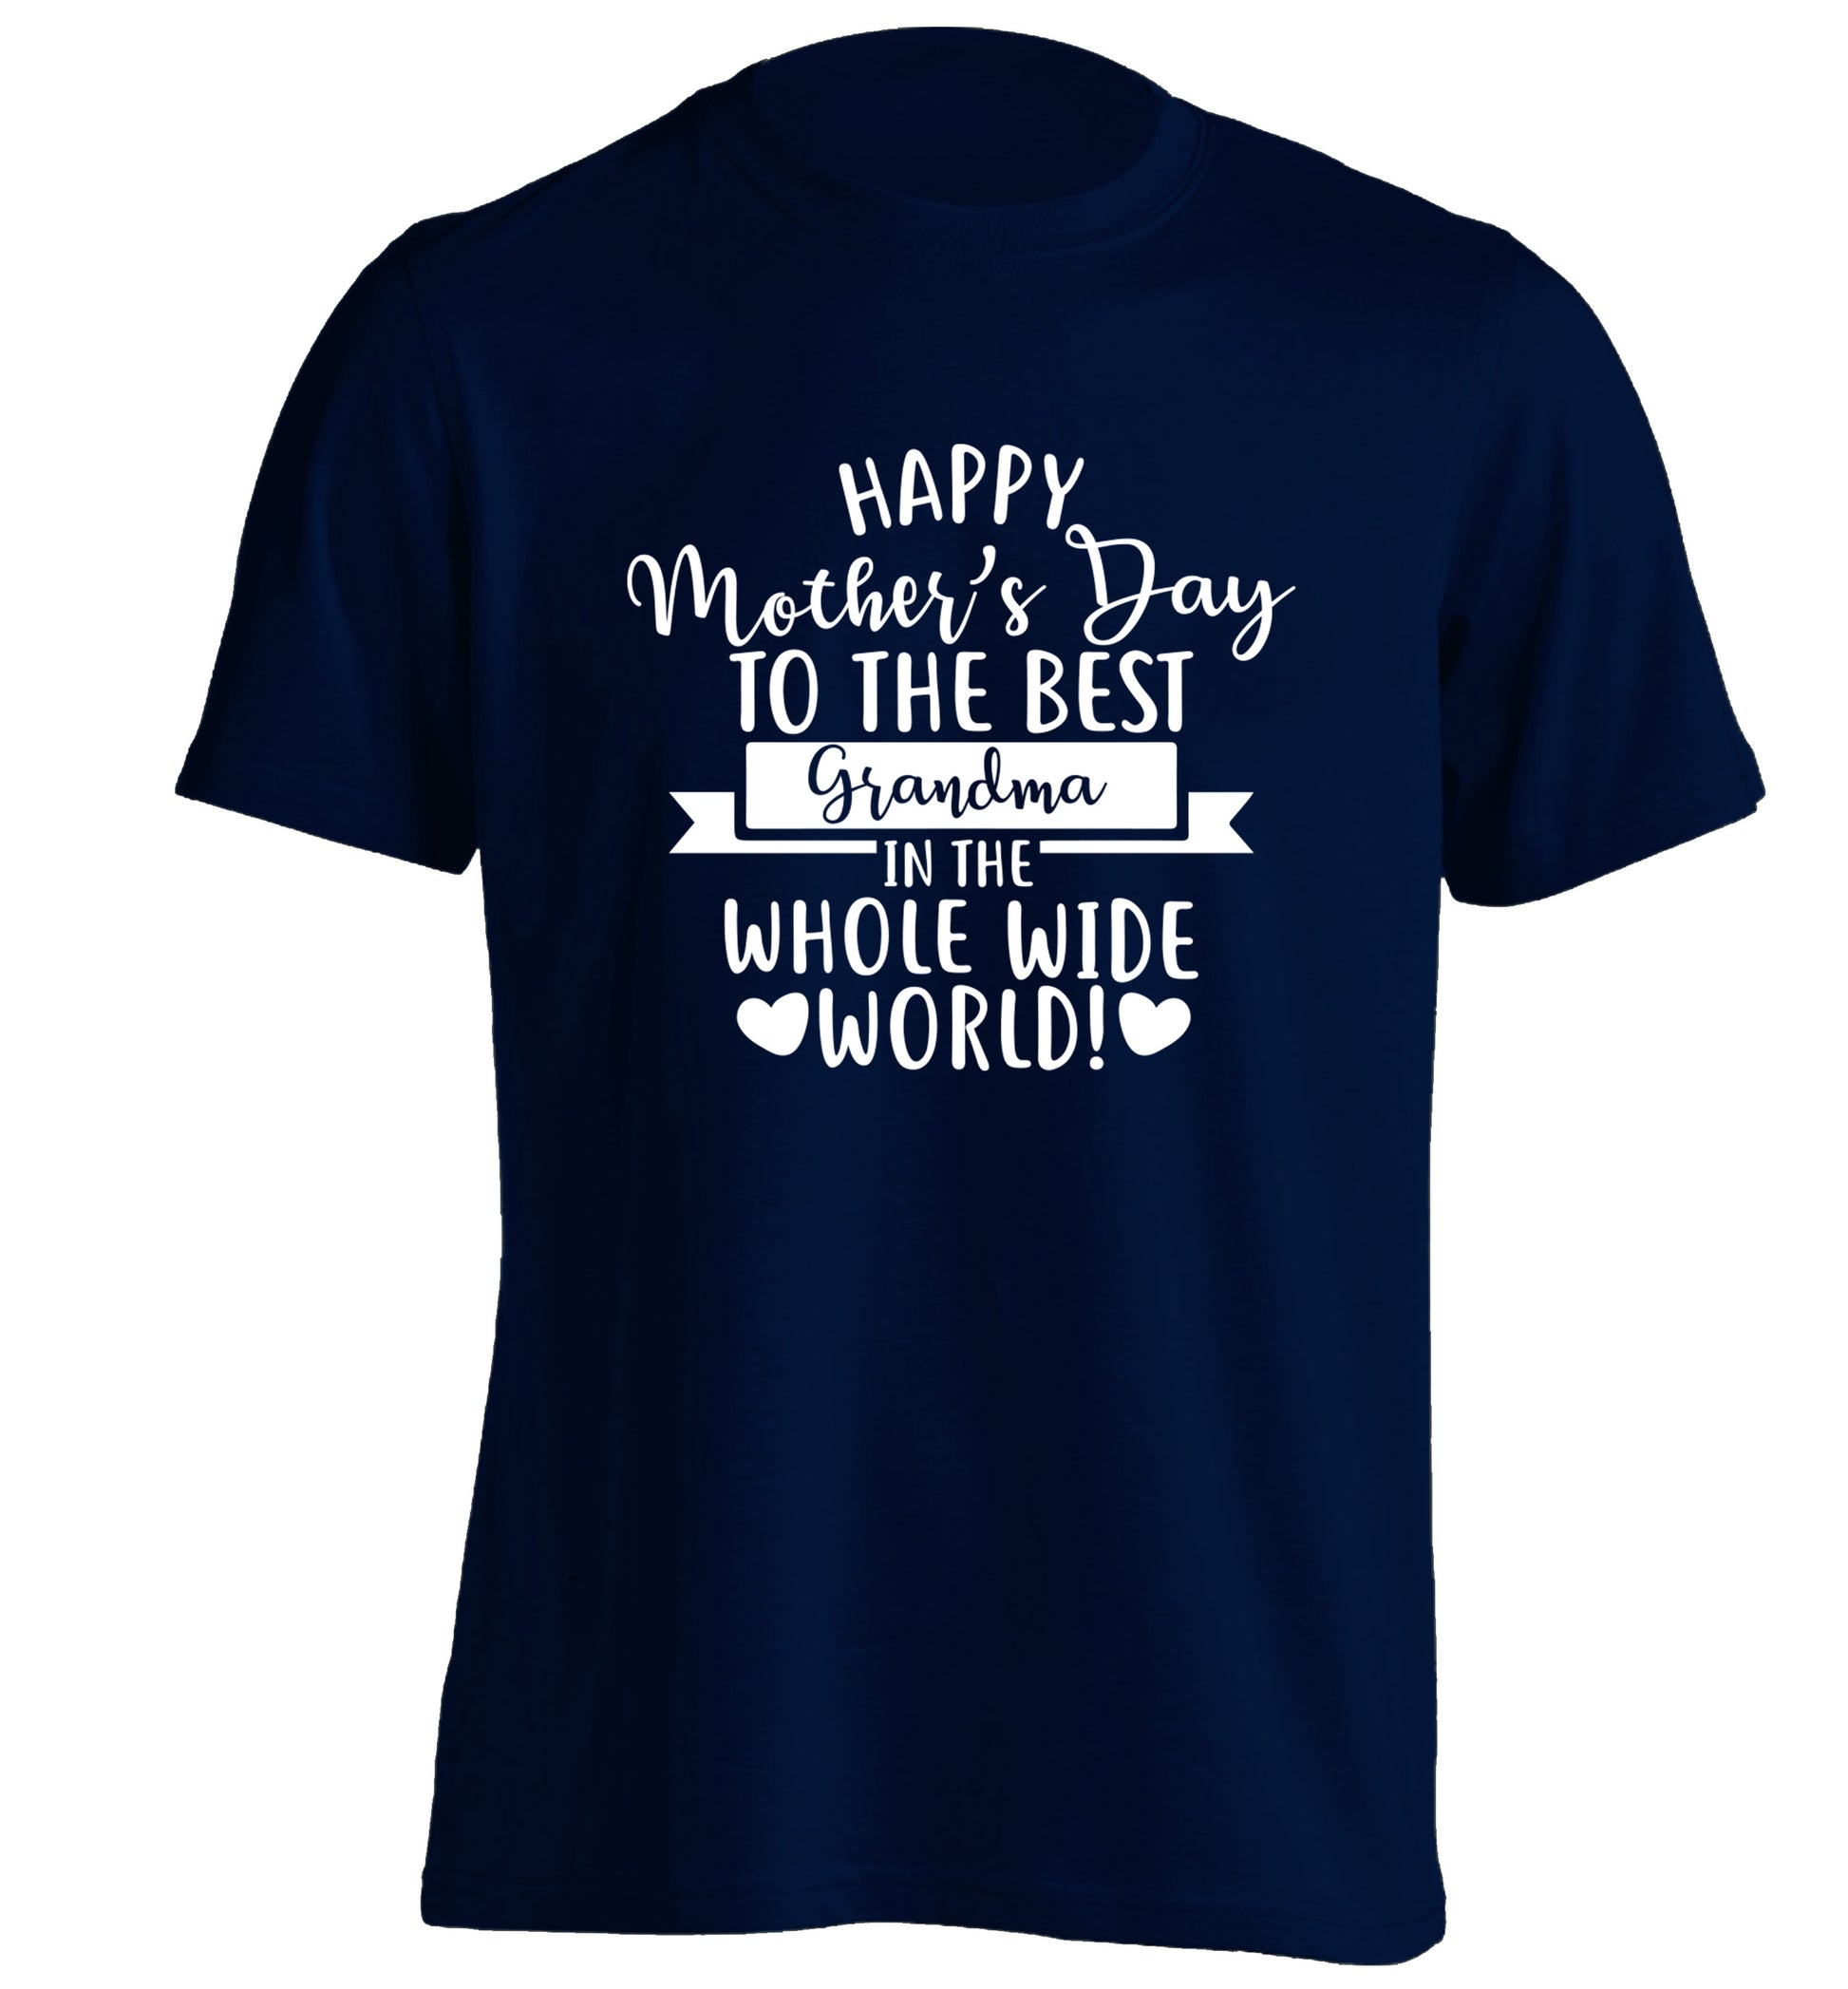 Happy mother's day to the best Grandma in the world adults unisex navy Tshirt 2XL